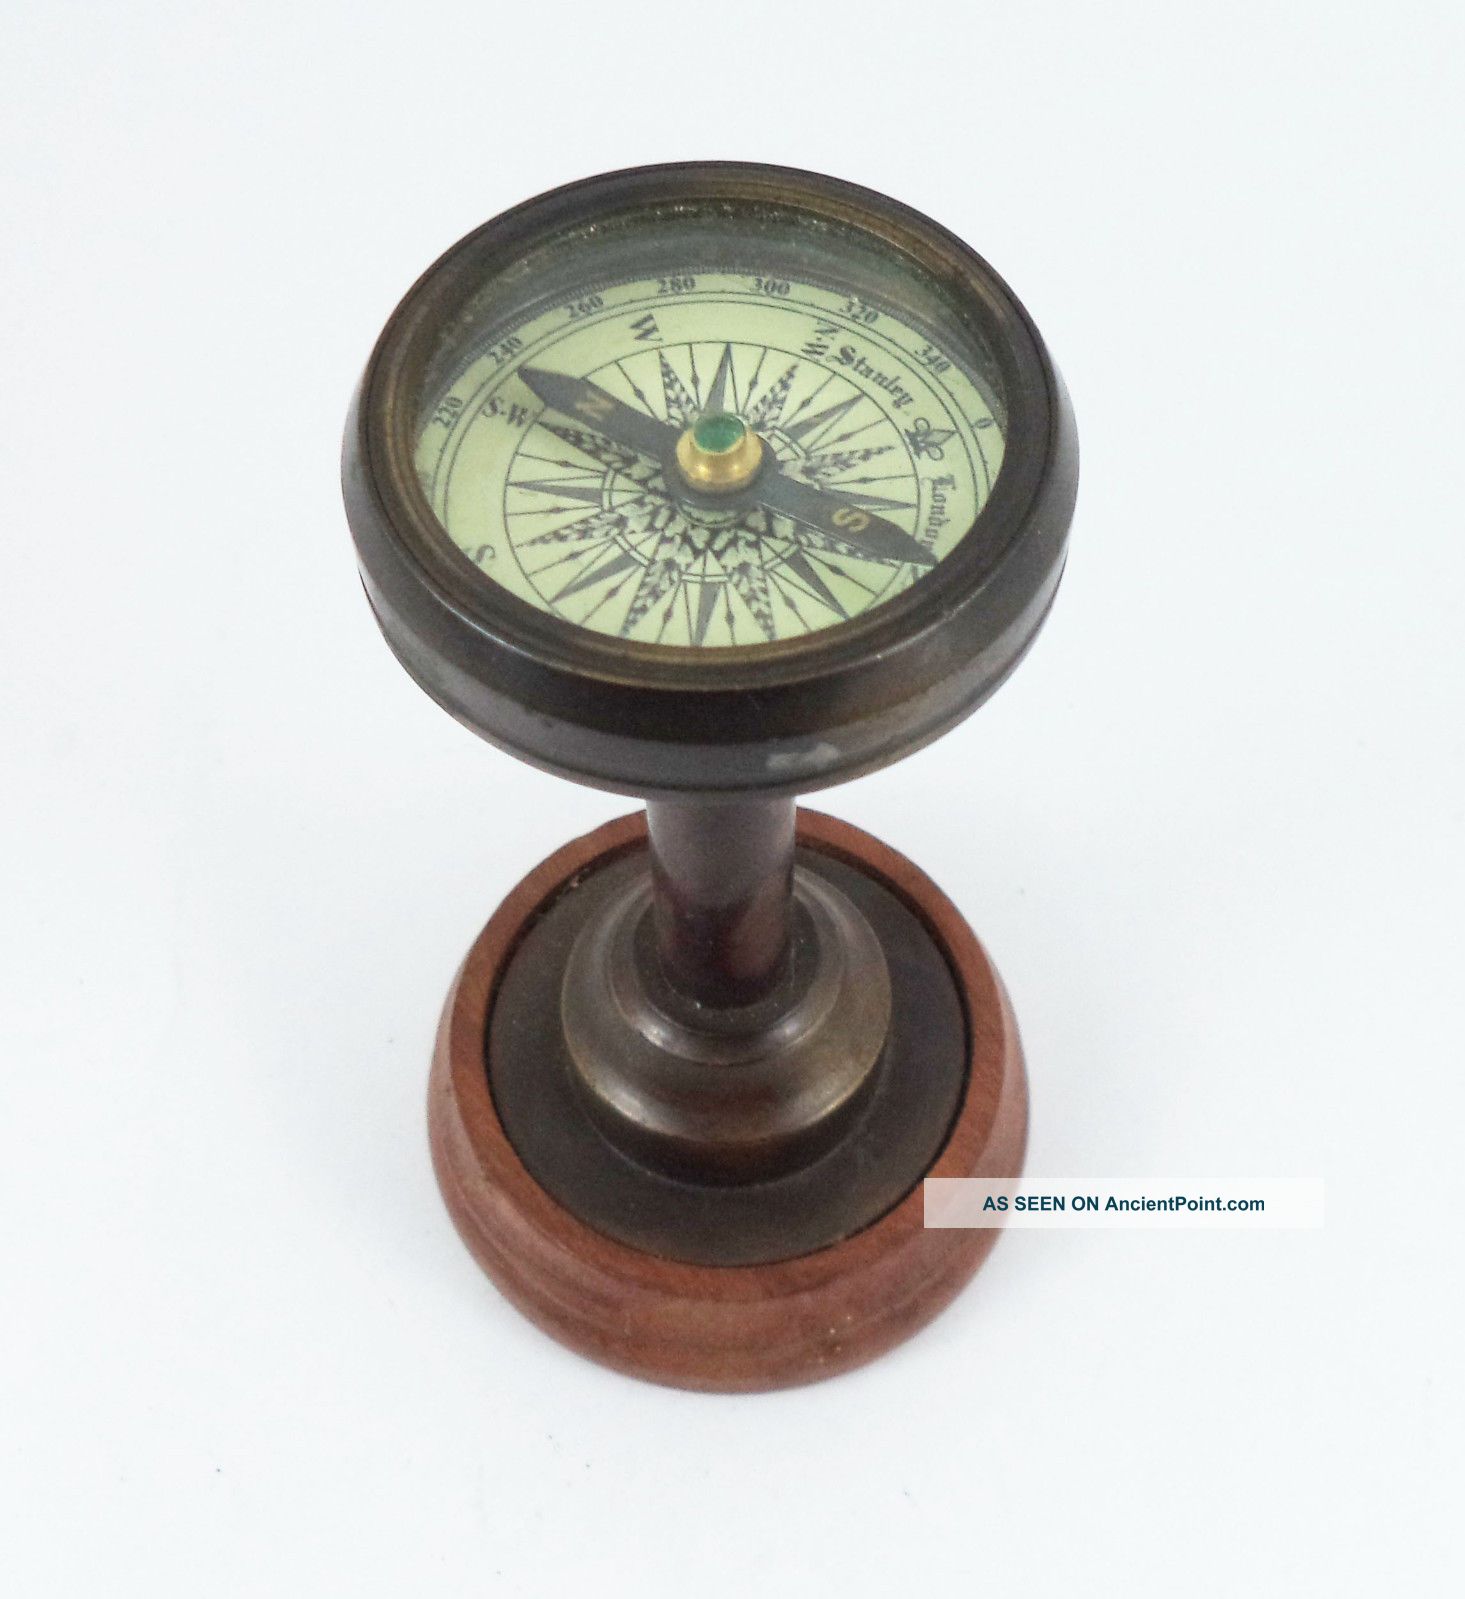 Reproduction Antique Nautical Desktop Brass Compass With Wood Stand Compasses photo